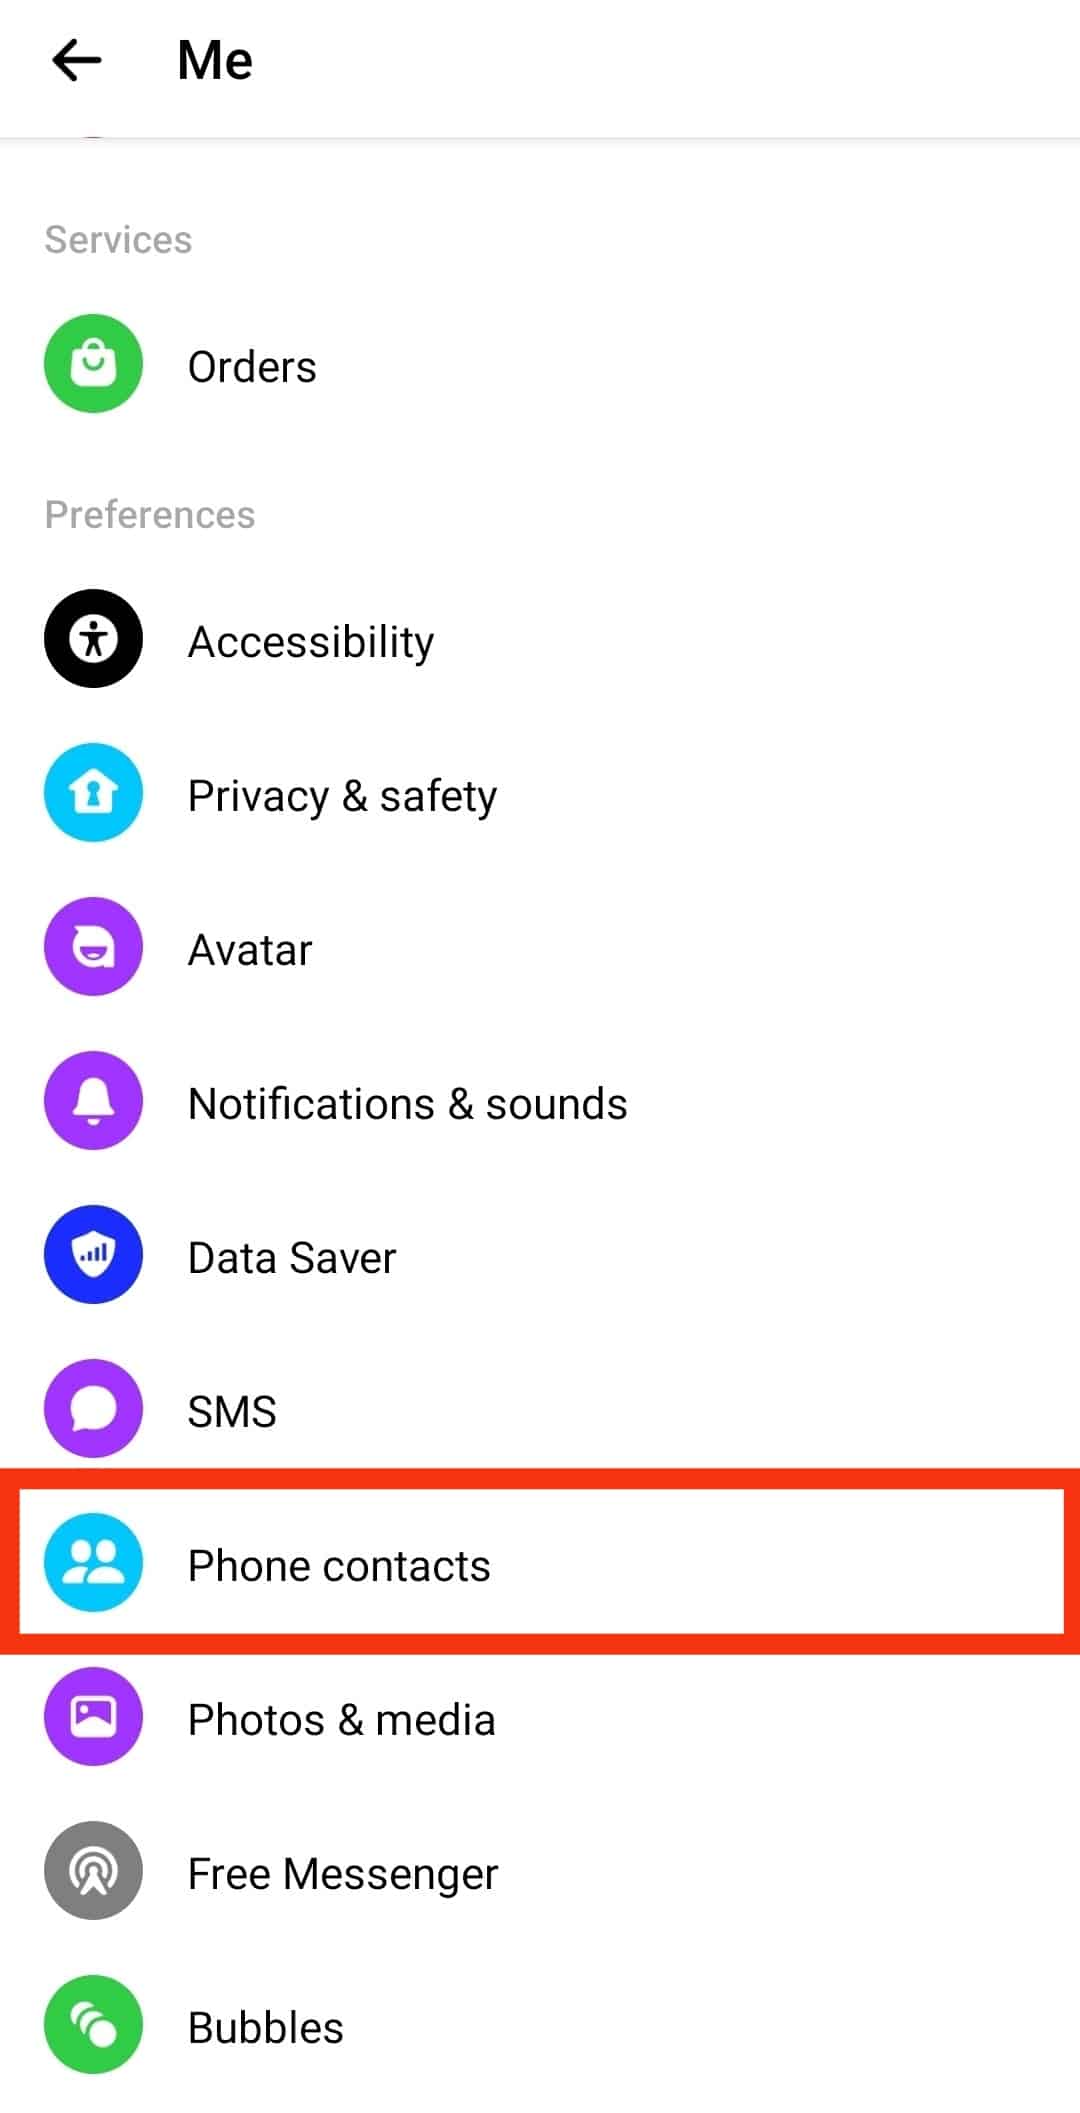 Select Phone Contacts